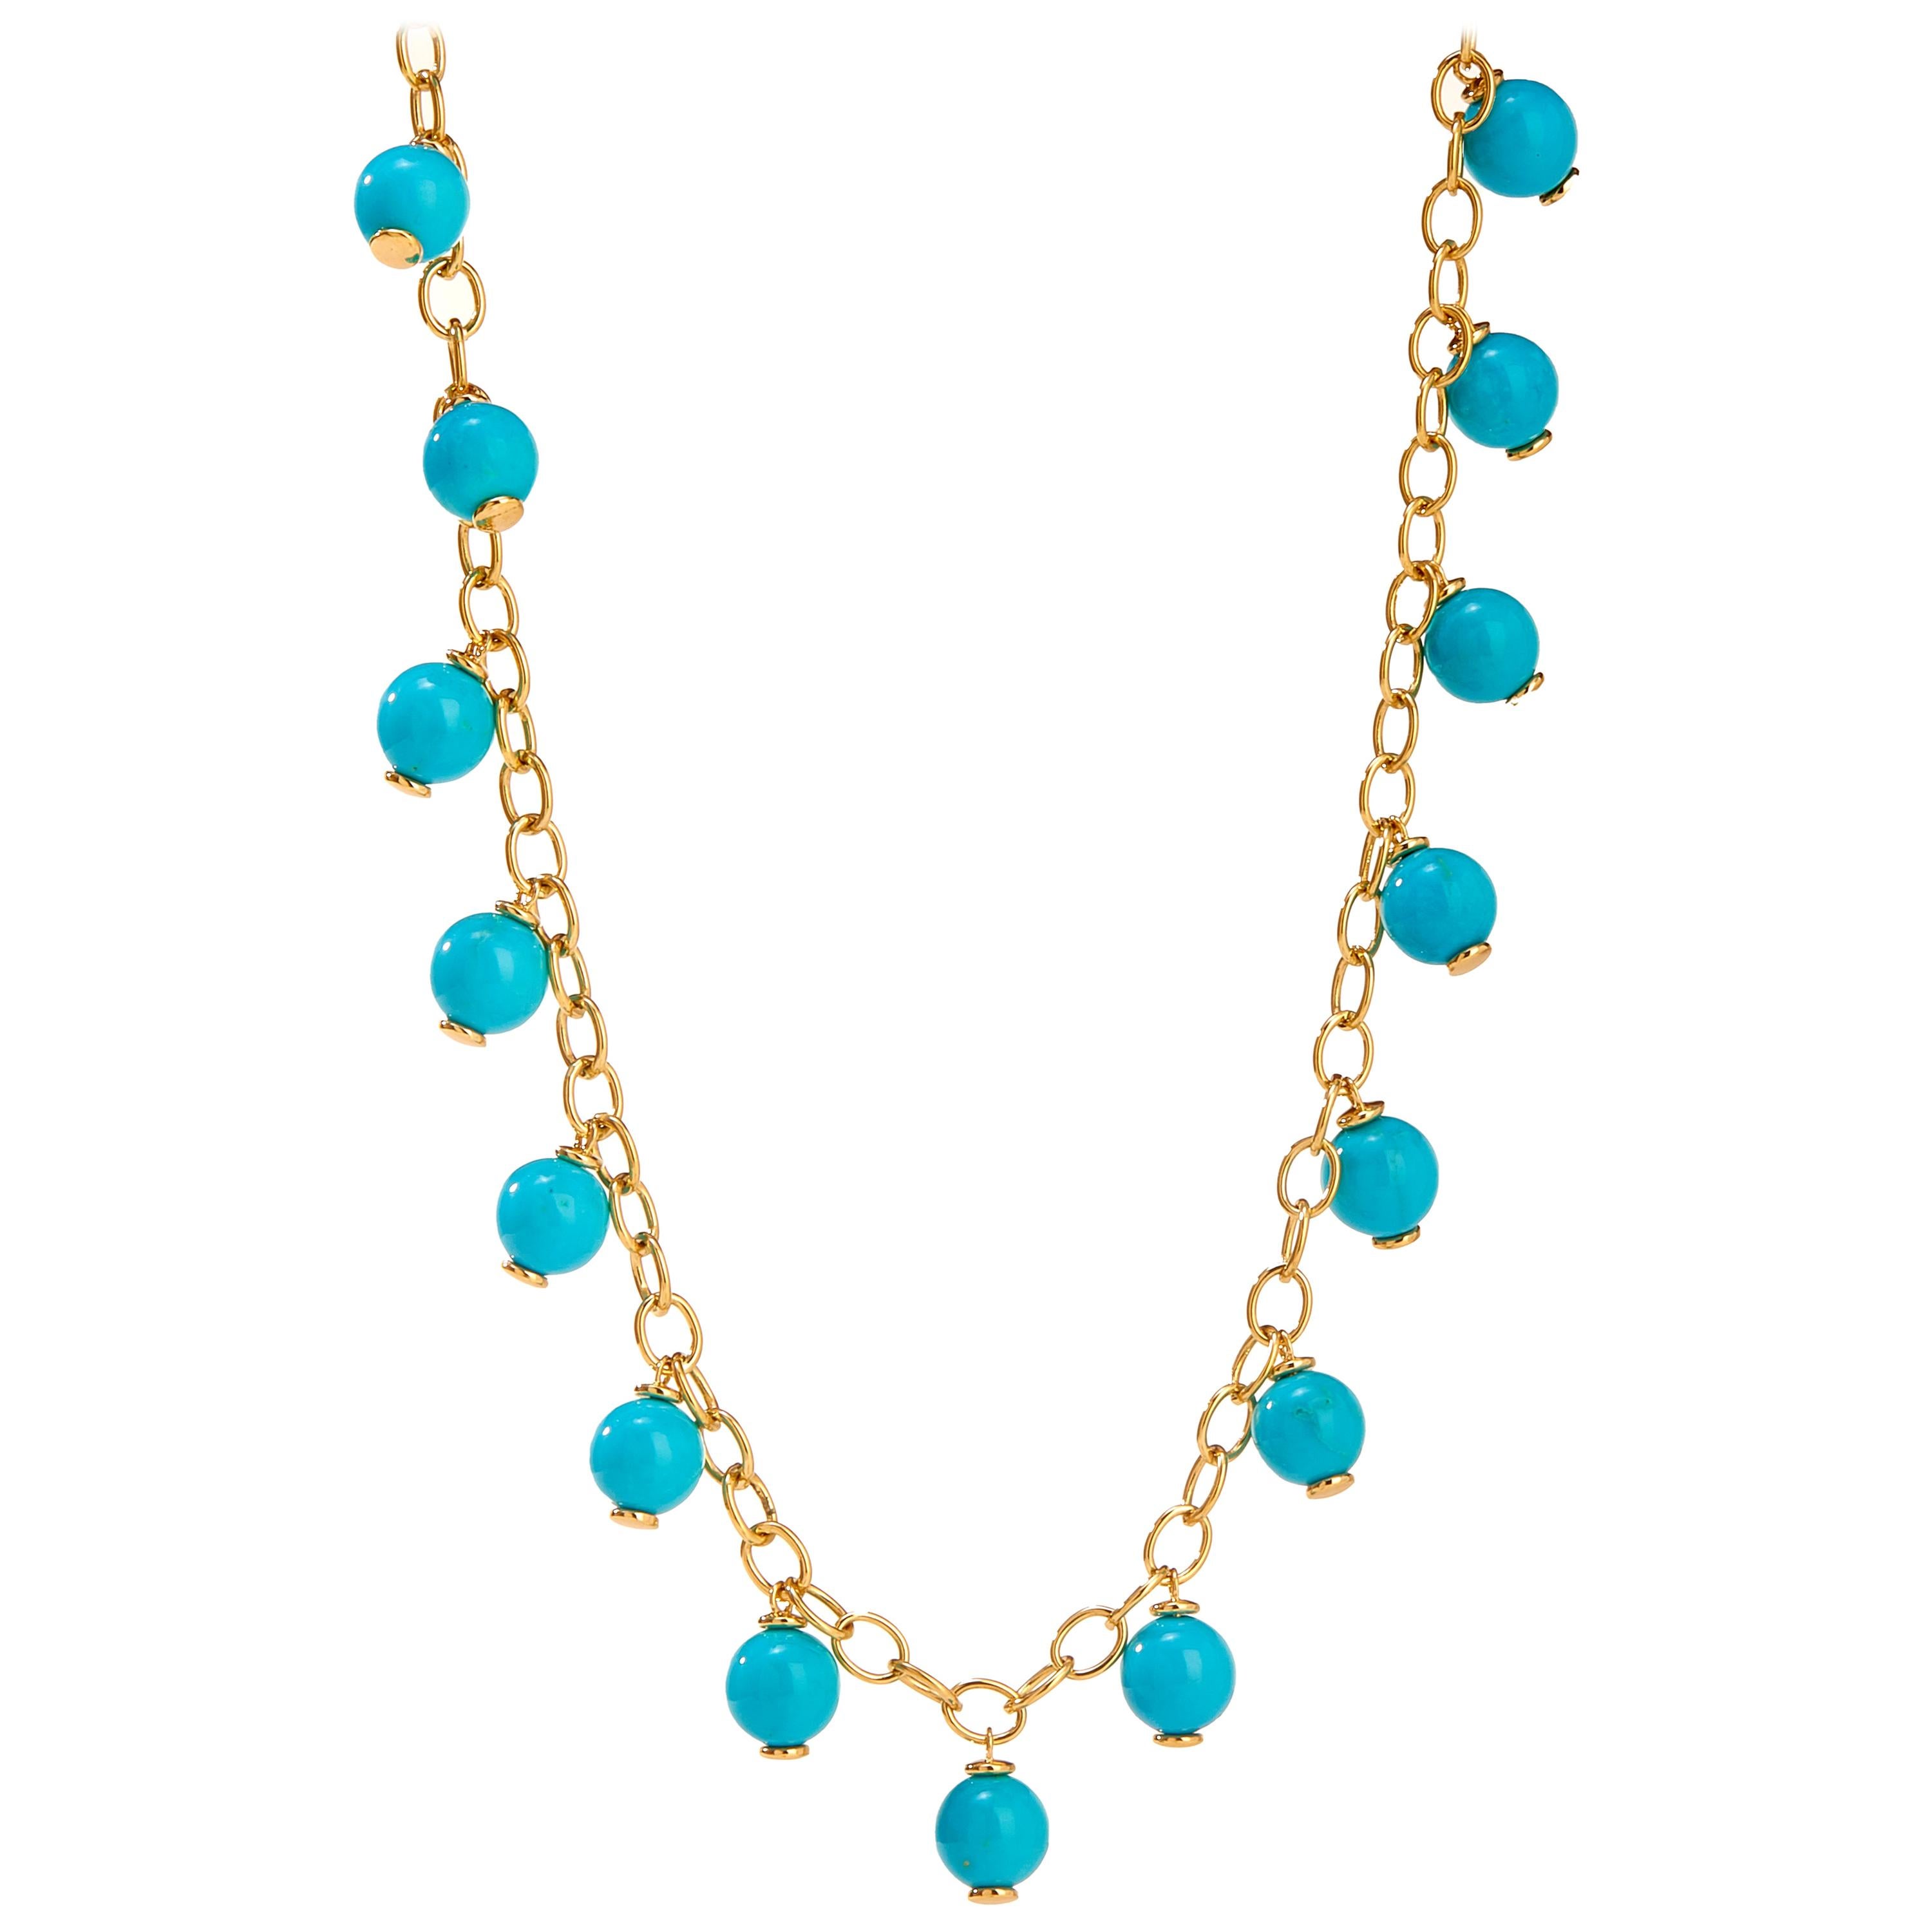 Syna Yellow Gold Sleeping Beauty Turquoise Bead Necklace